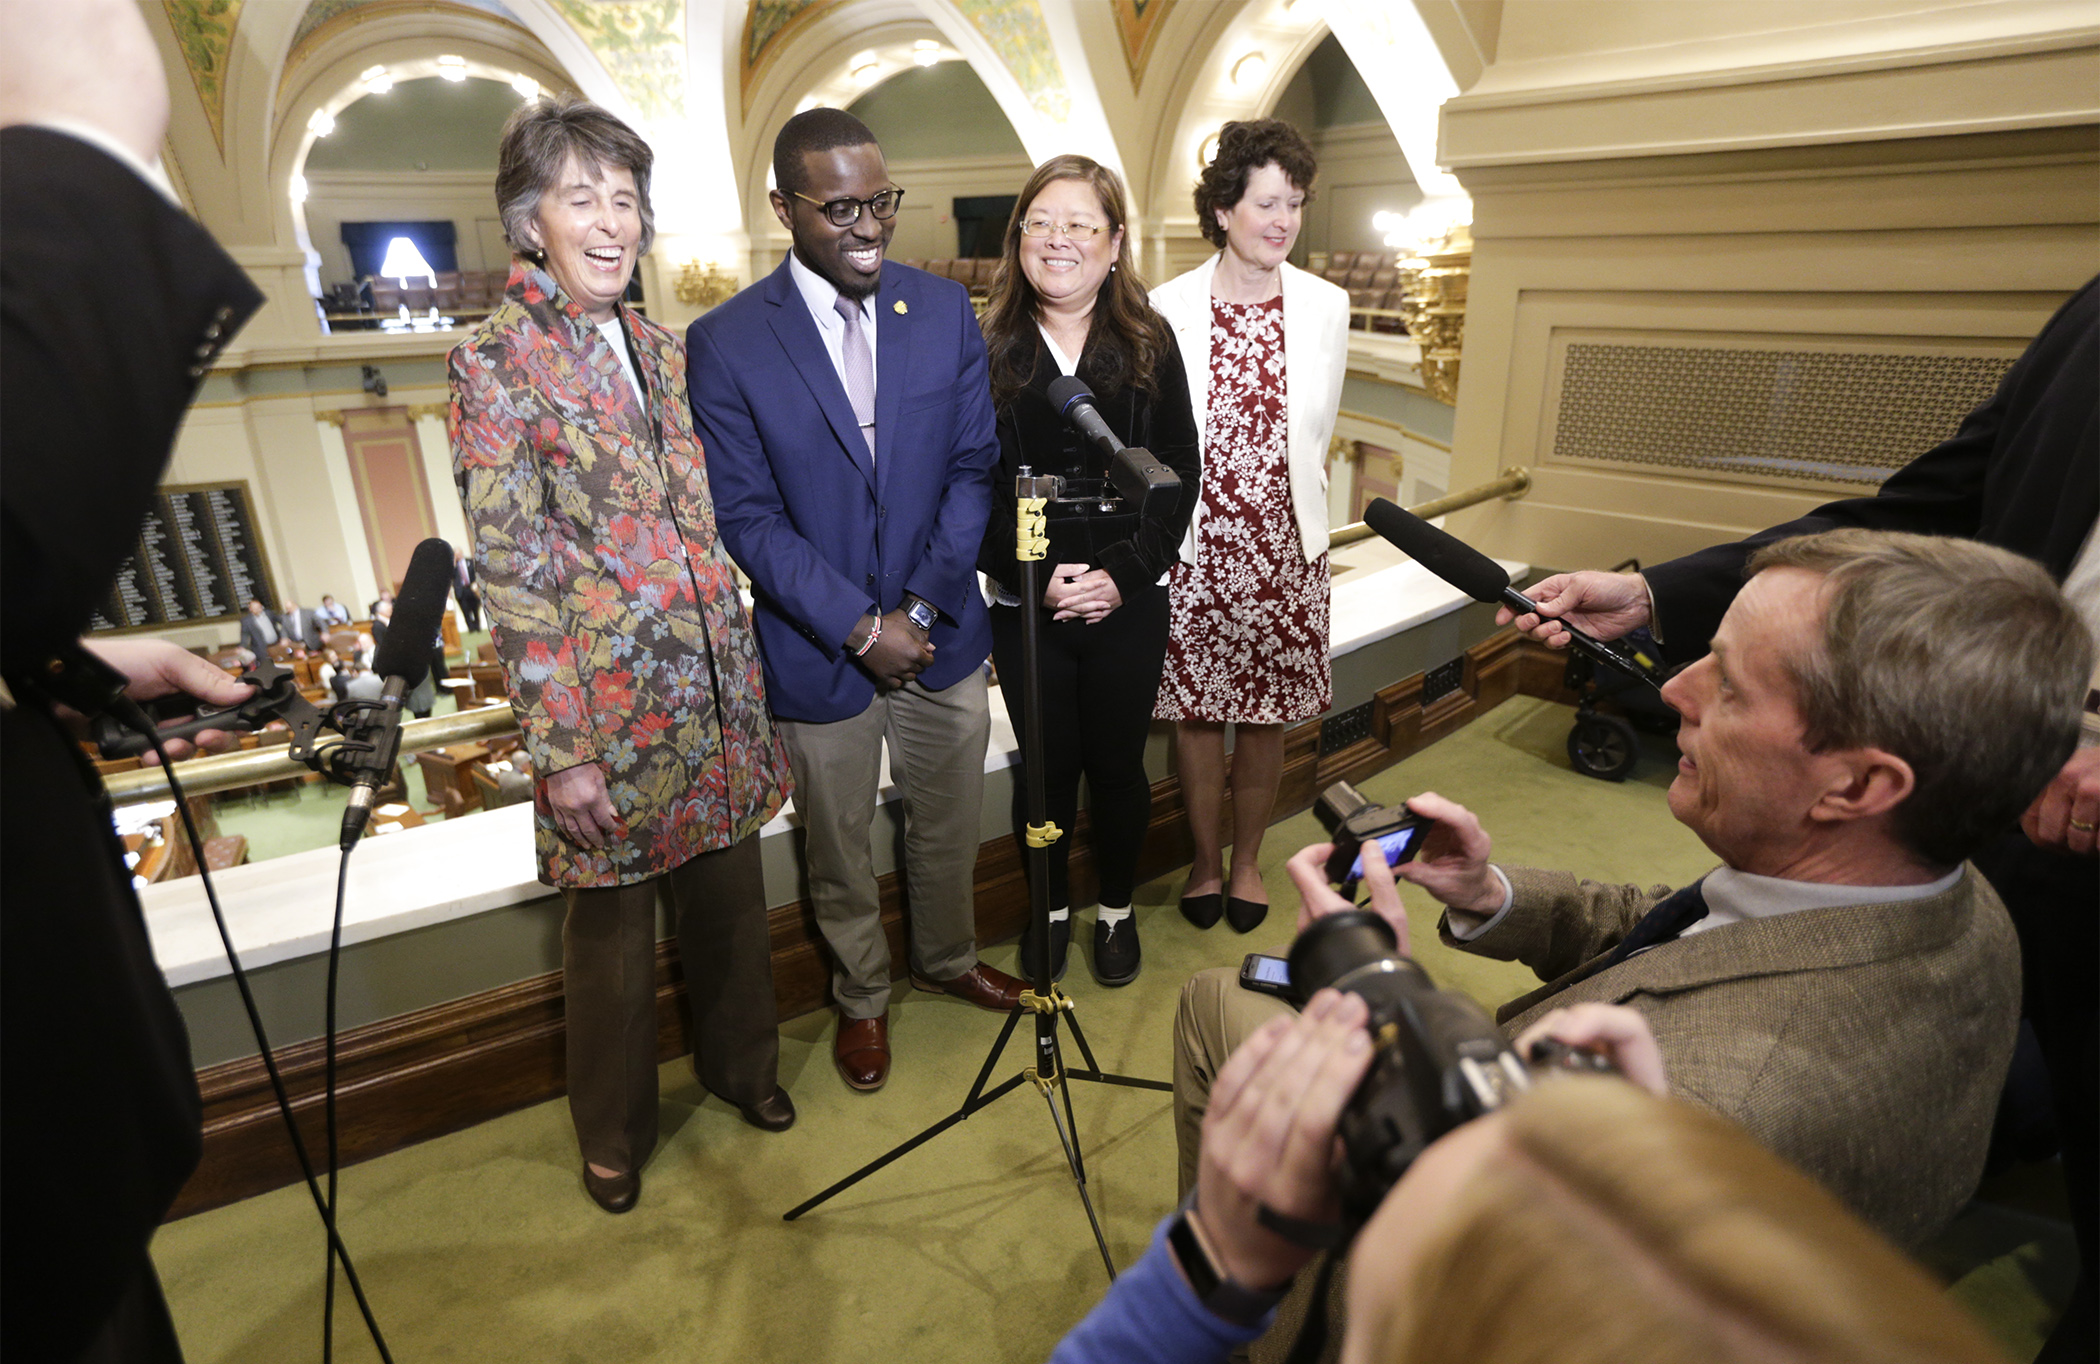 Newly elected University of Minnesota Regents Janie Mayeron, from left, Mike Kenyanya, Kao Ly Ilean Her and Mary Davenport gather to speak with the media after being chosen by a joint convention of the Legislature May 9. Photo by Paul Battaglia